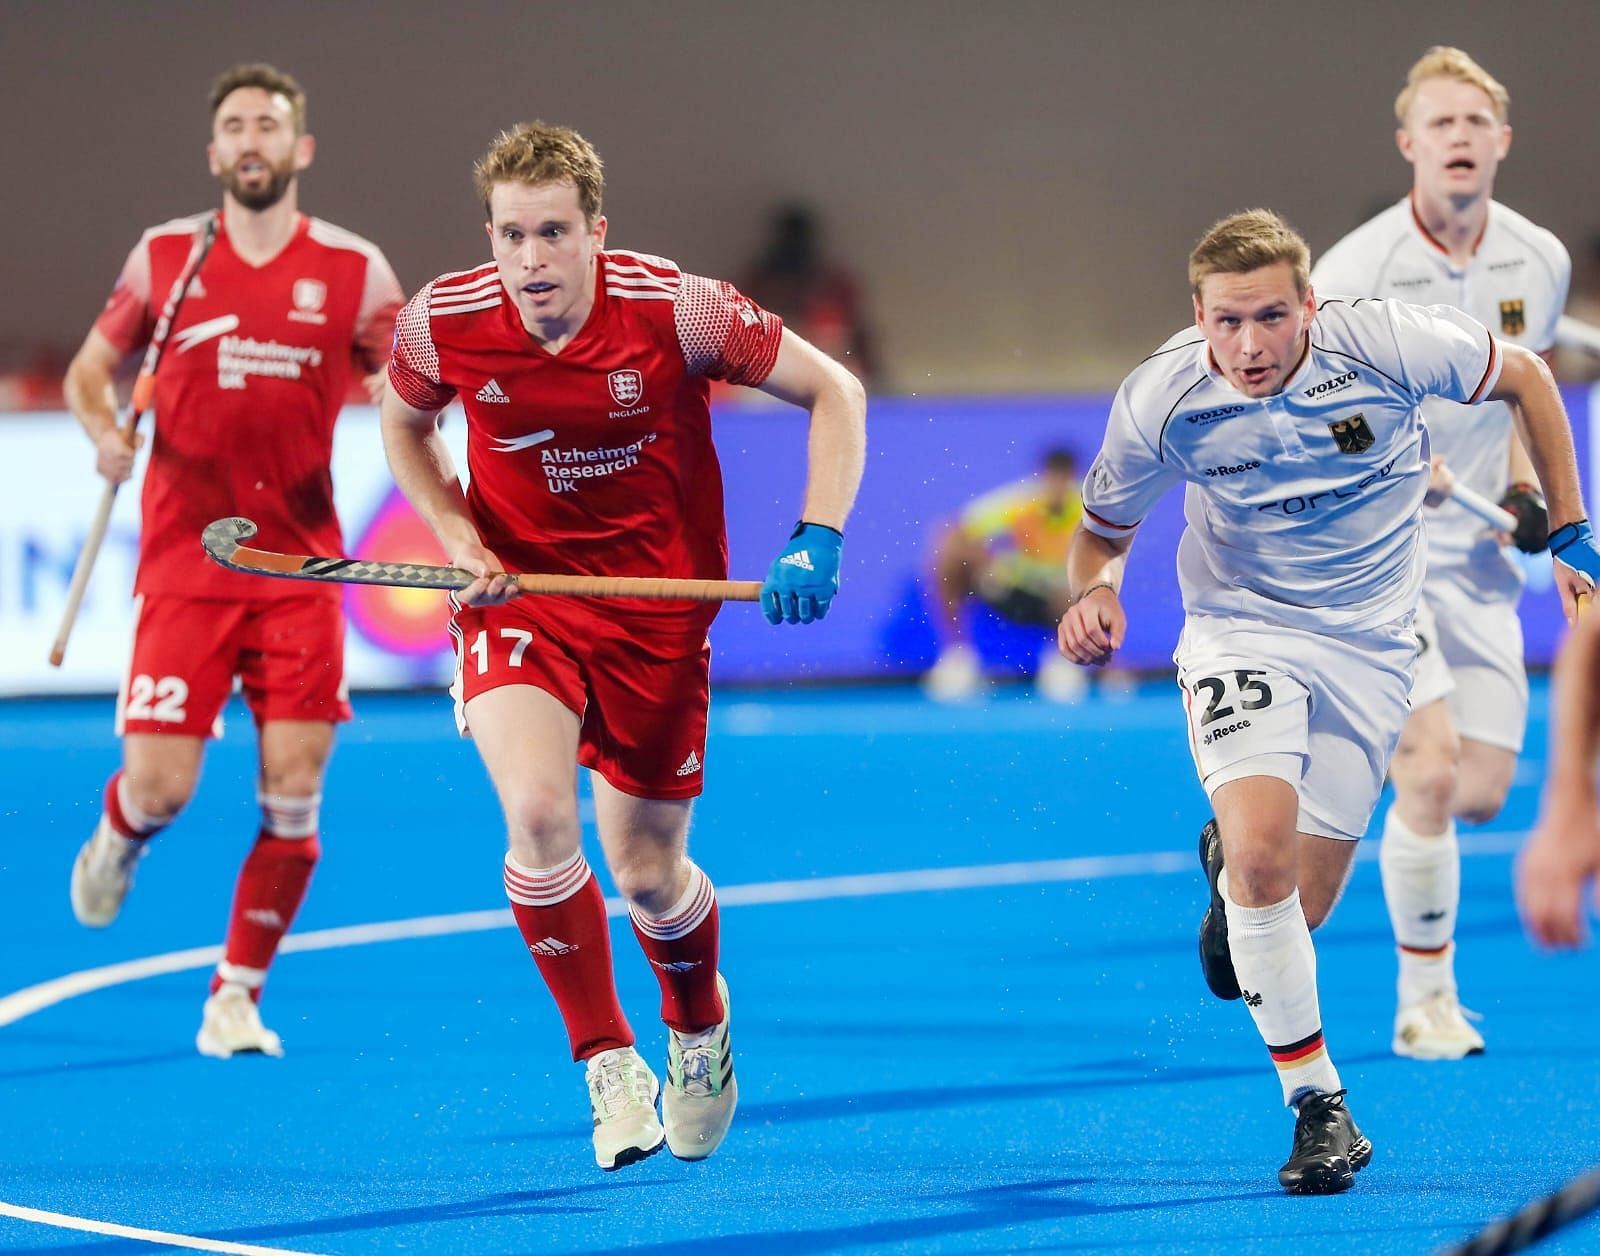 England and Germany teams in action in an earlier match (Image Courtesy: Twitter/Hockey India)